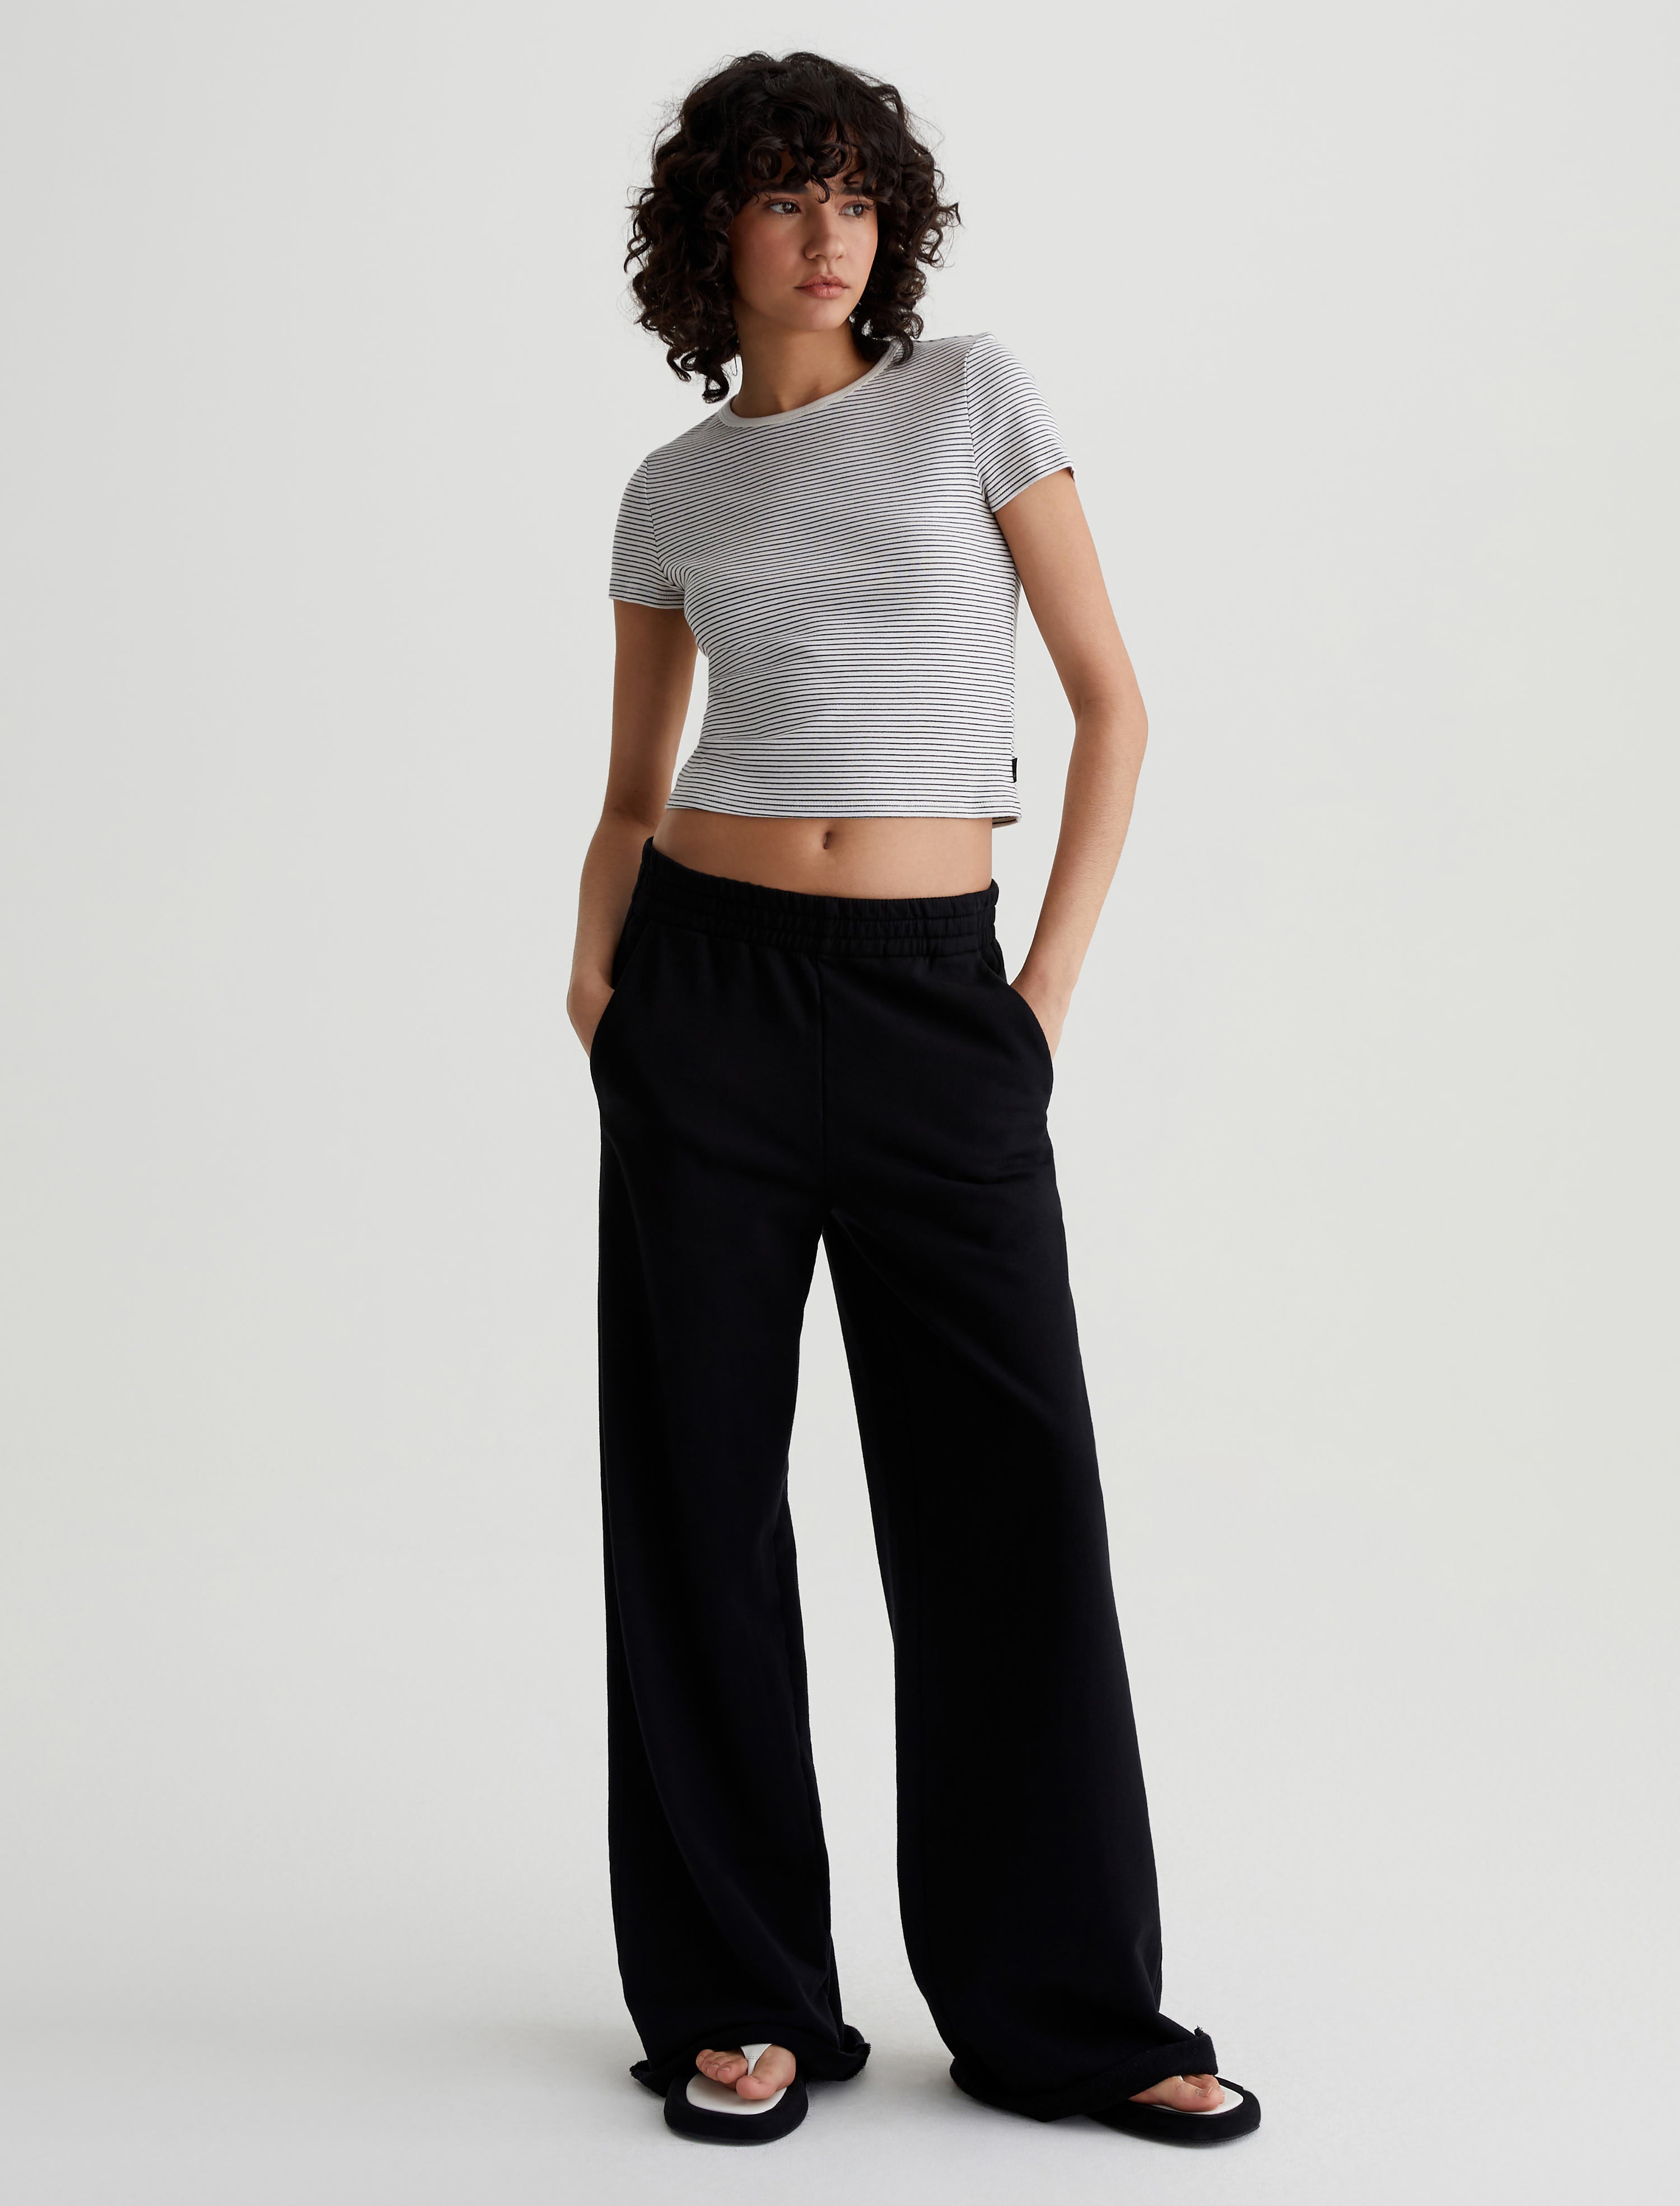 Relaxed Fit Bottom - Buy Relaxed Fit Bottom online in India